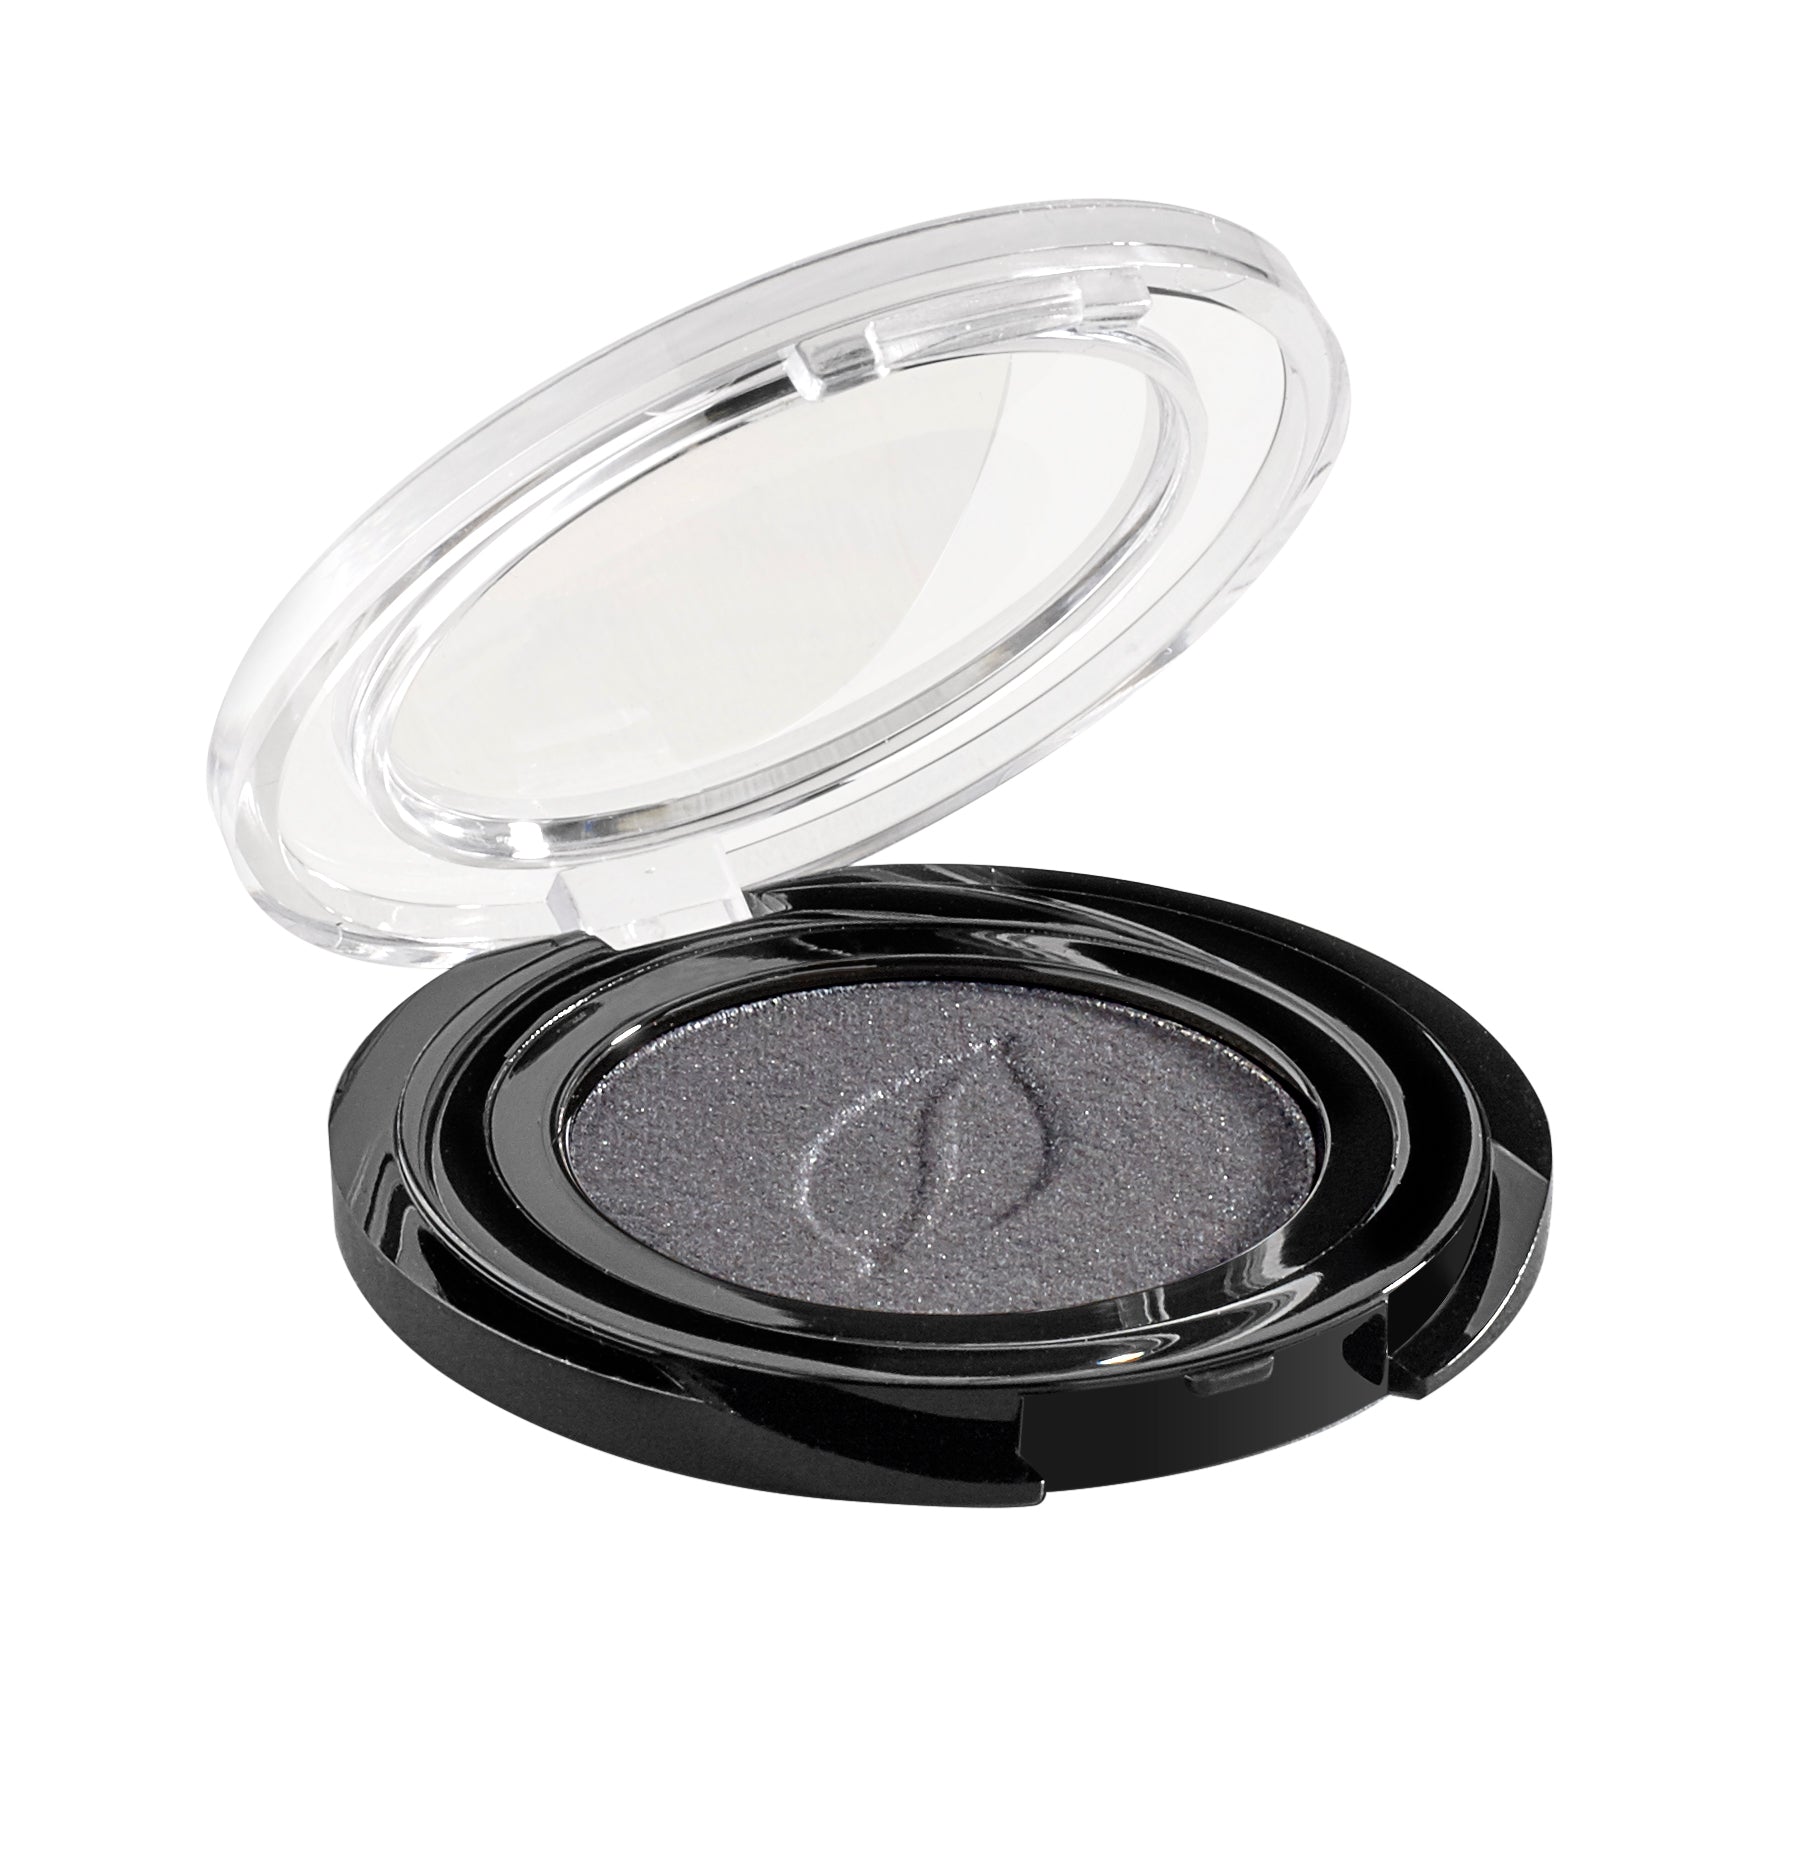 Gris Anthracite - Creamy Eyeshadow Anthracite Grey - Ma French Beauty